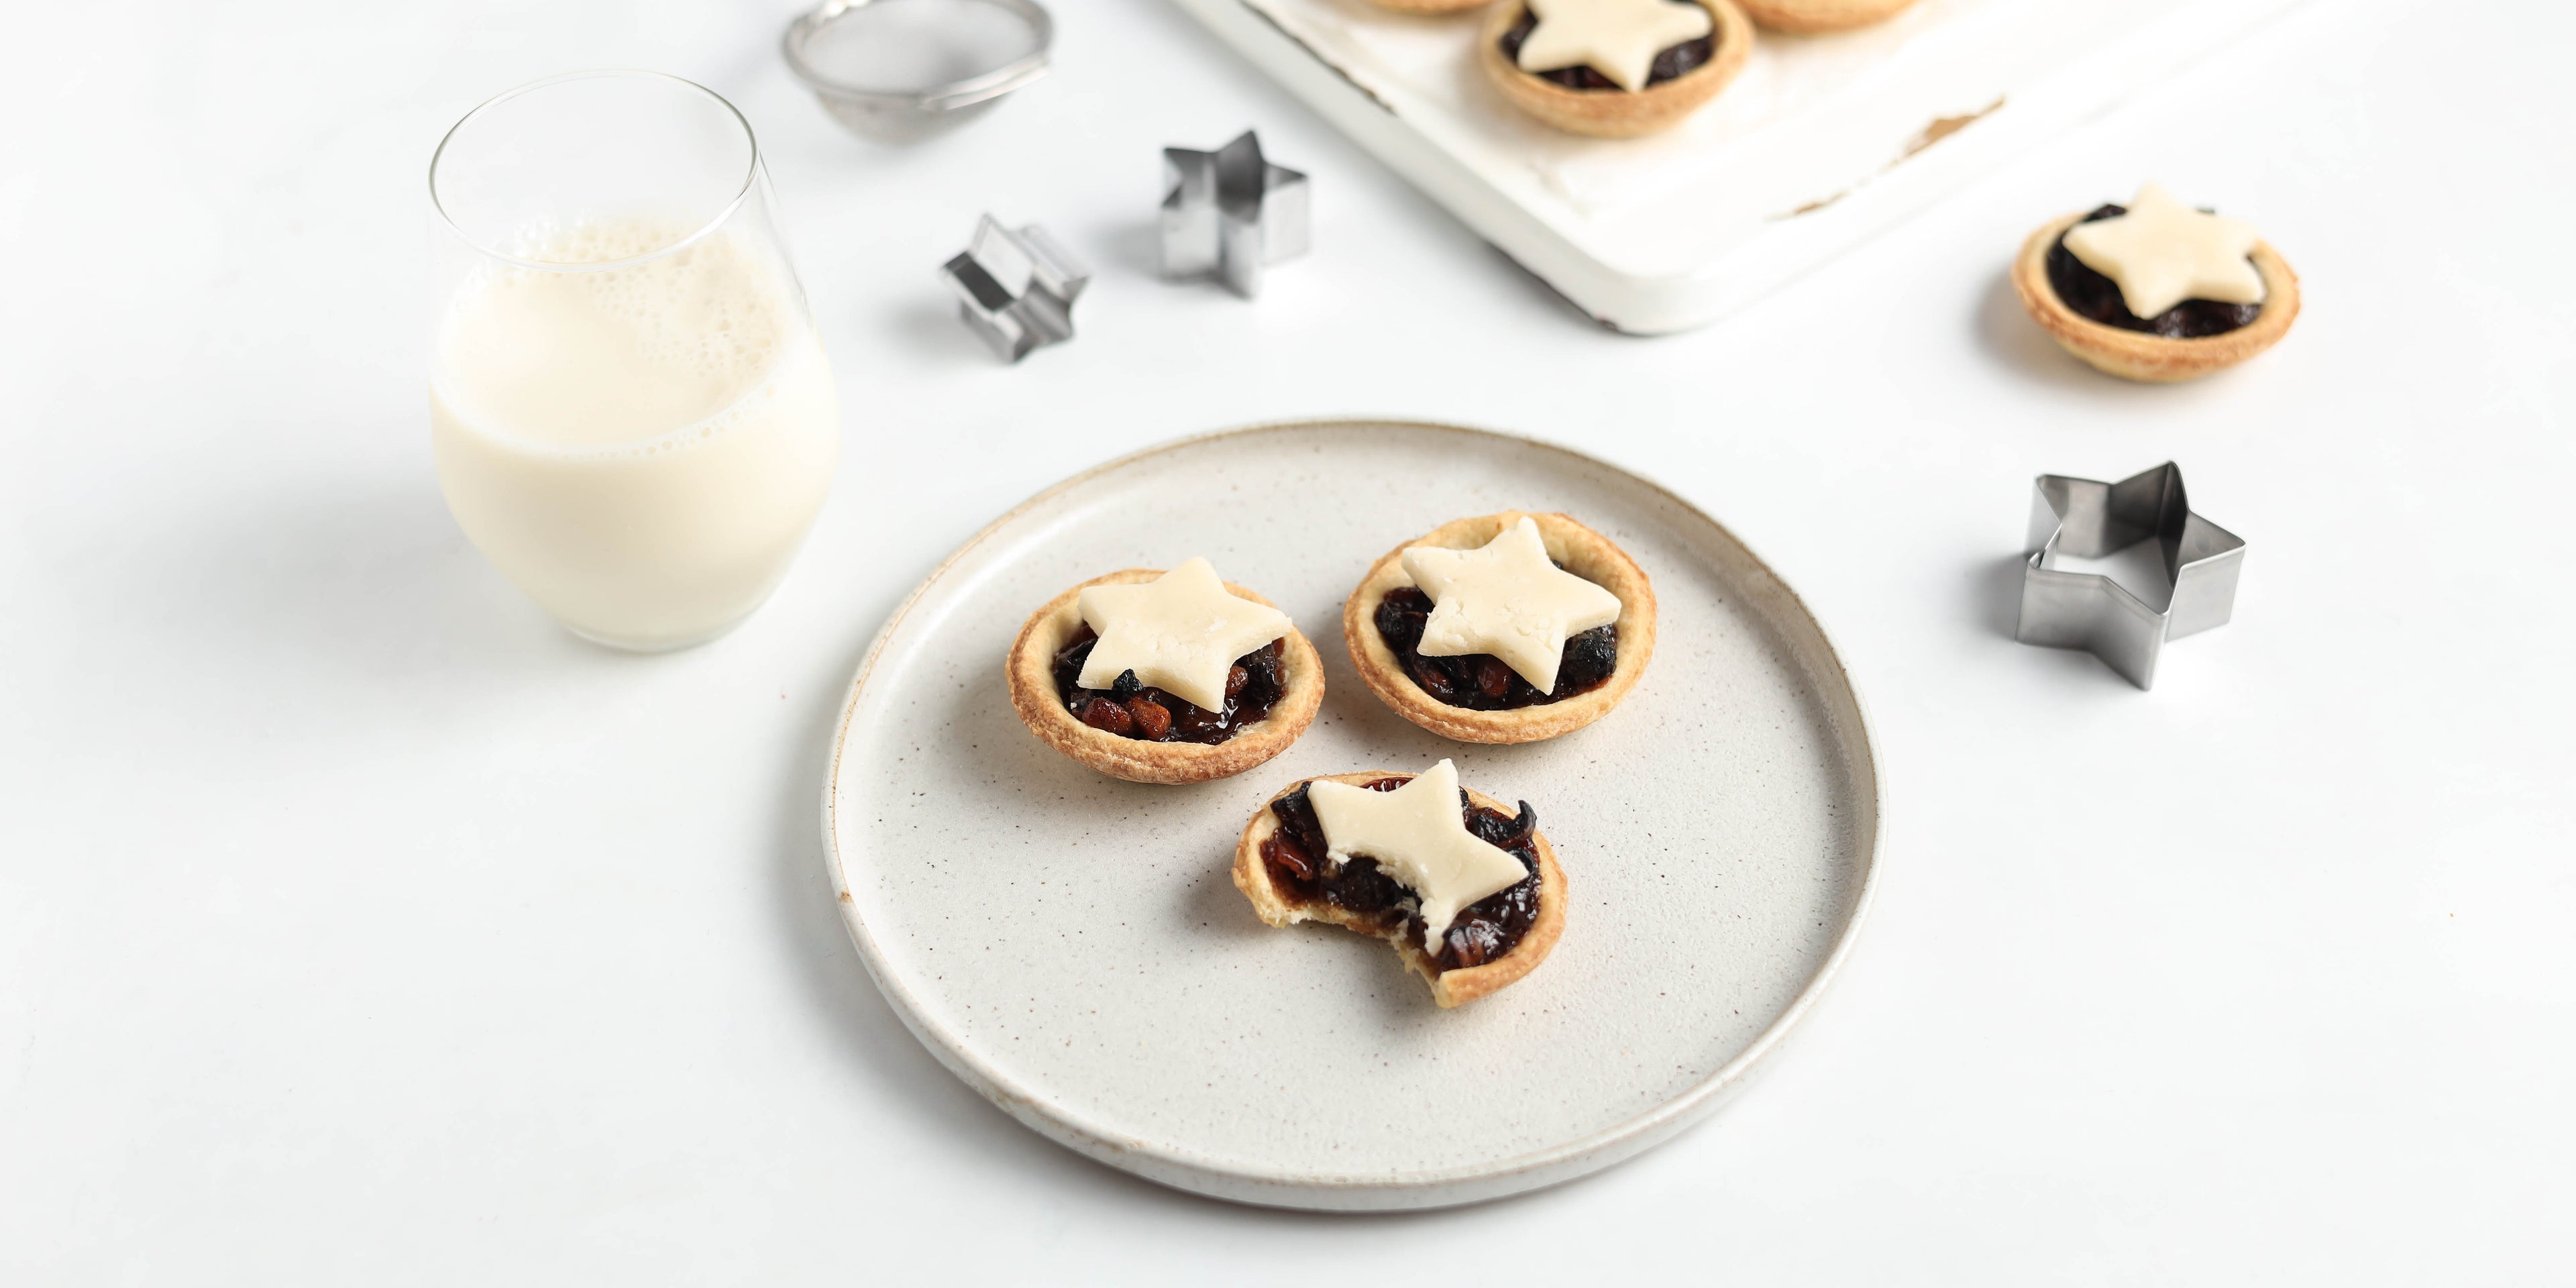 A plate of three mince pies with a glass of milk